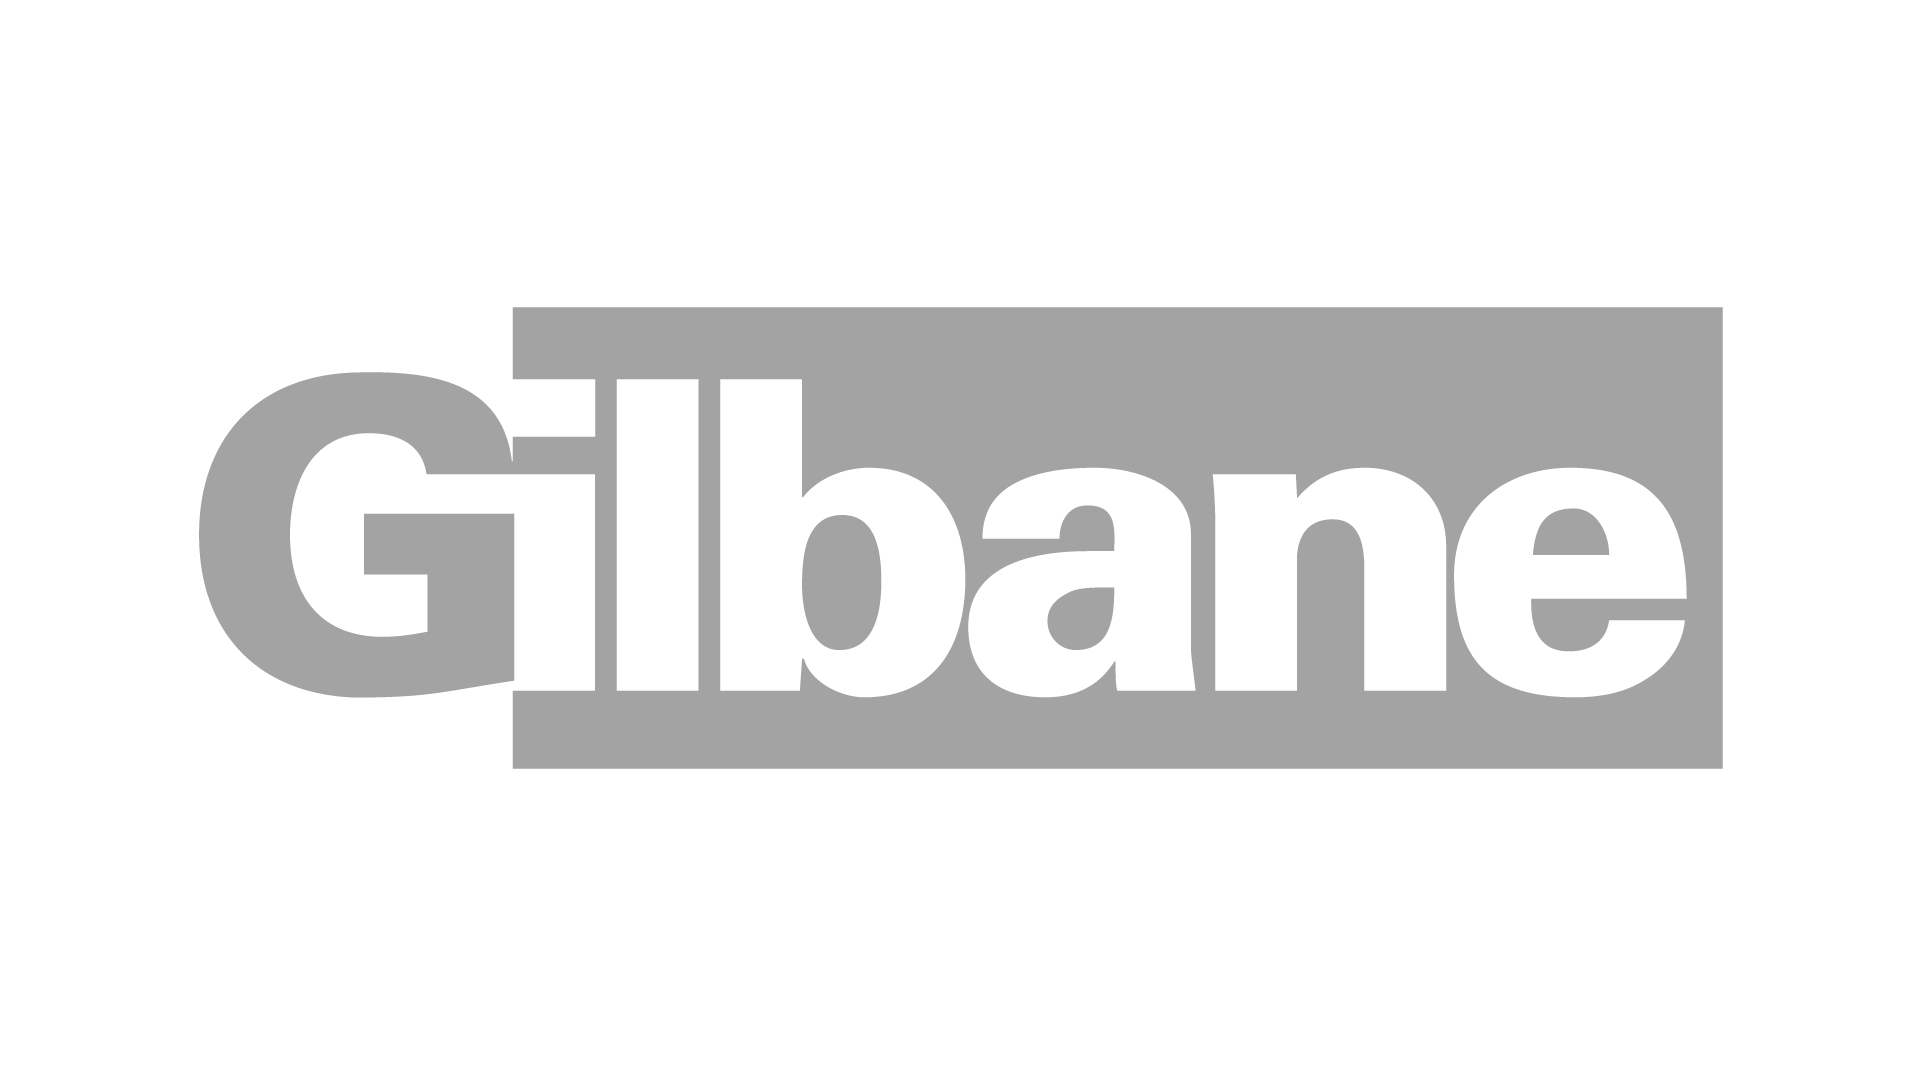 Cloud-in-Hand - Gilbane Success Safety